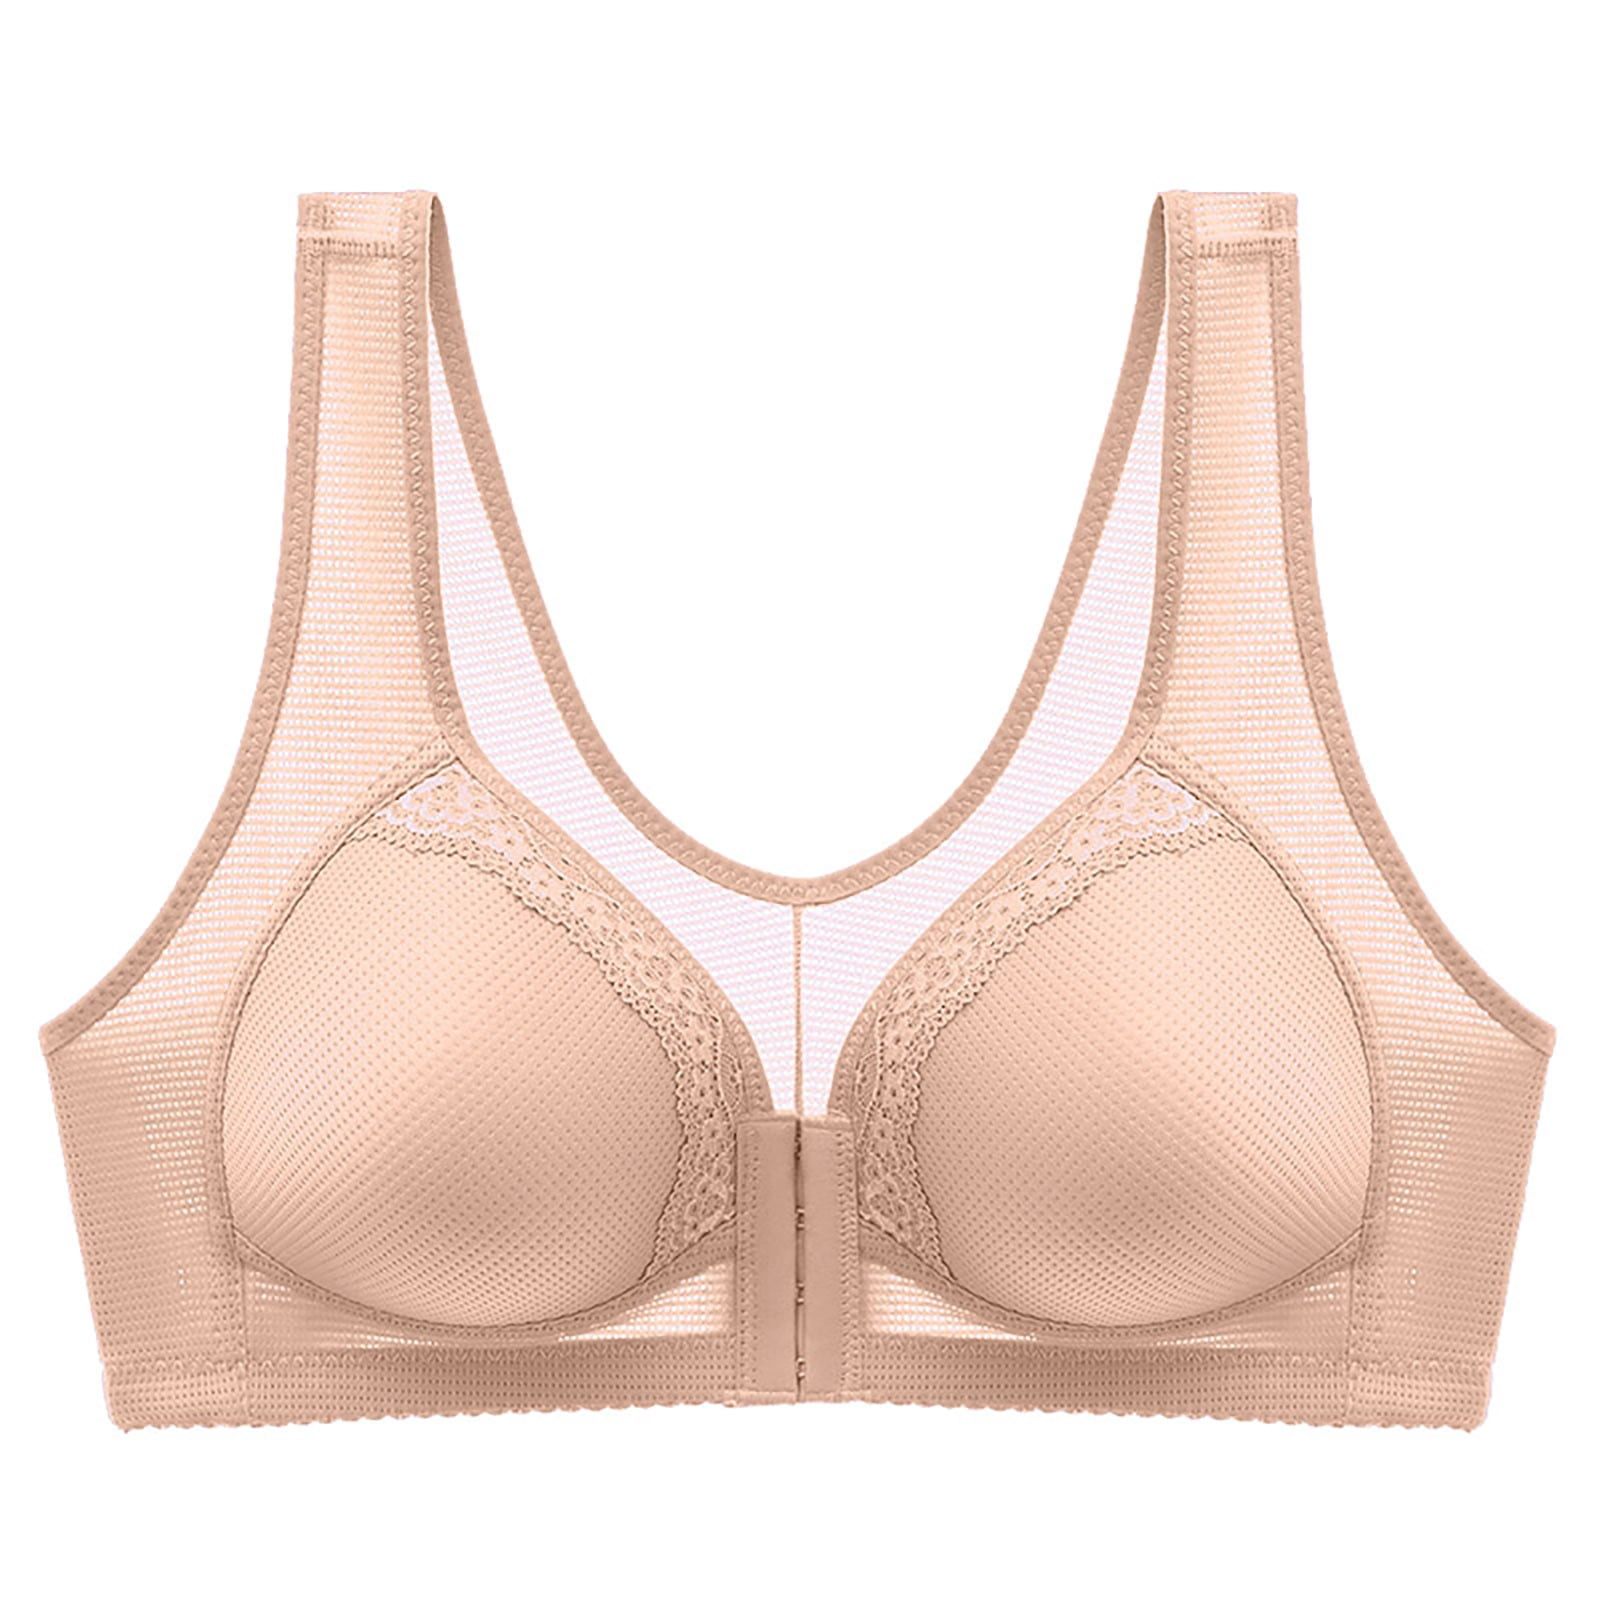 TOWED22 Plus Size Bras,Women's Lace Plus Size Full Coverage